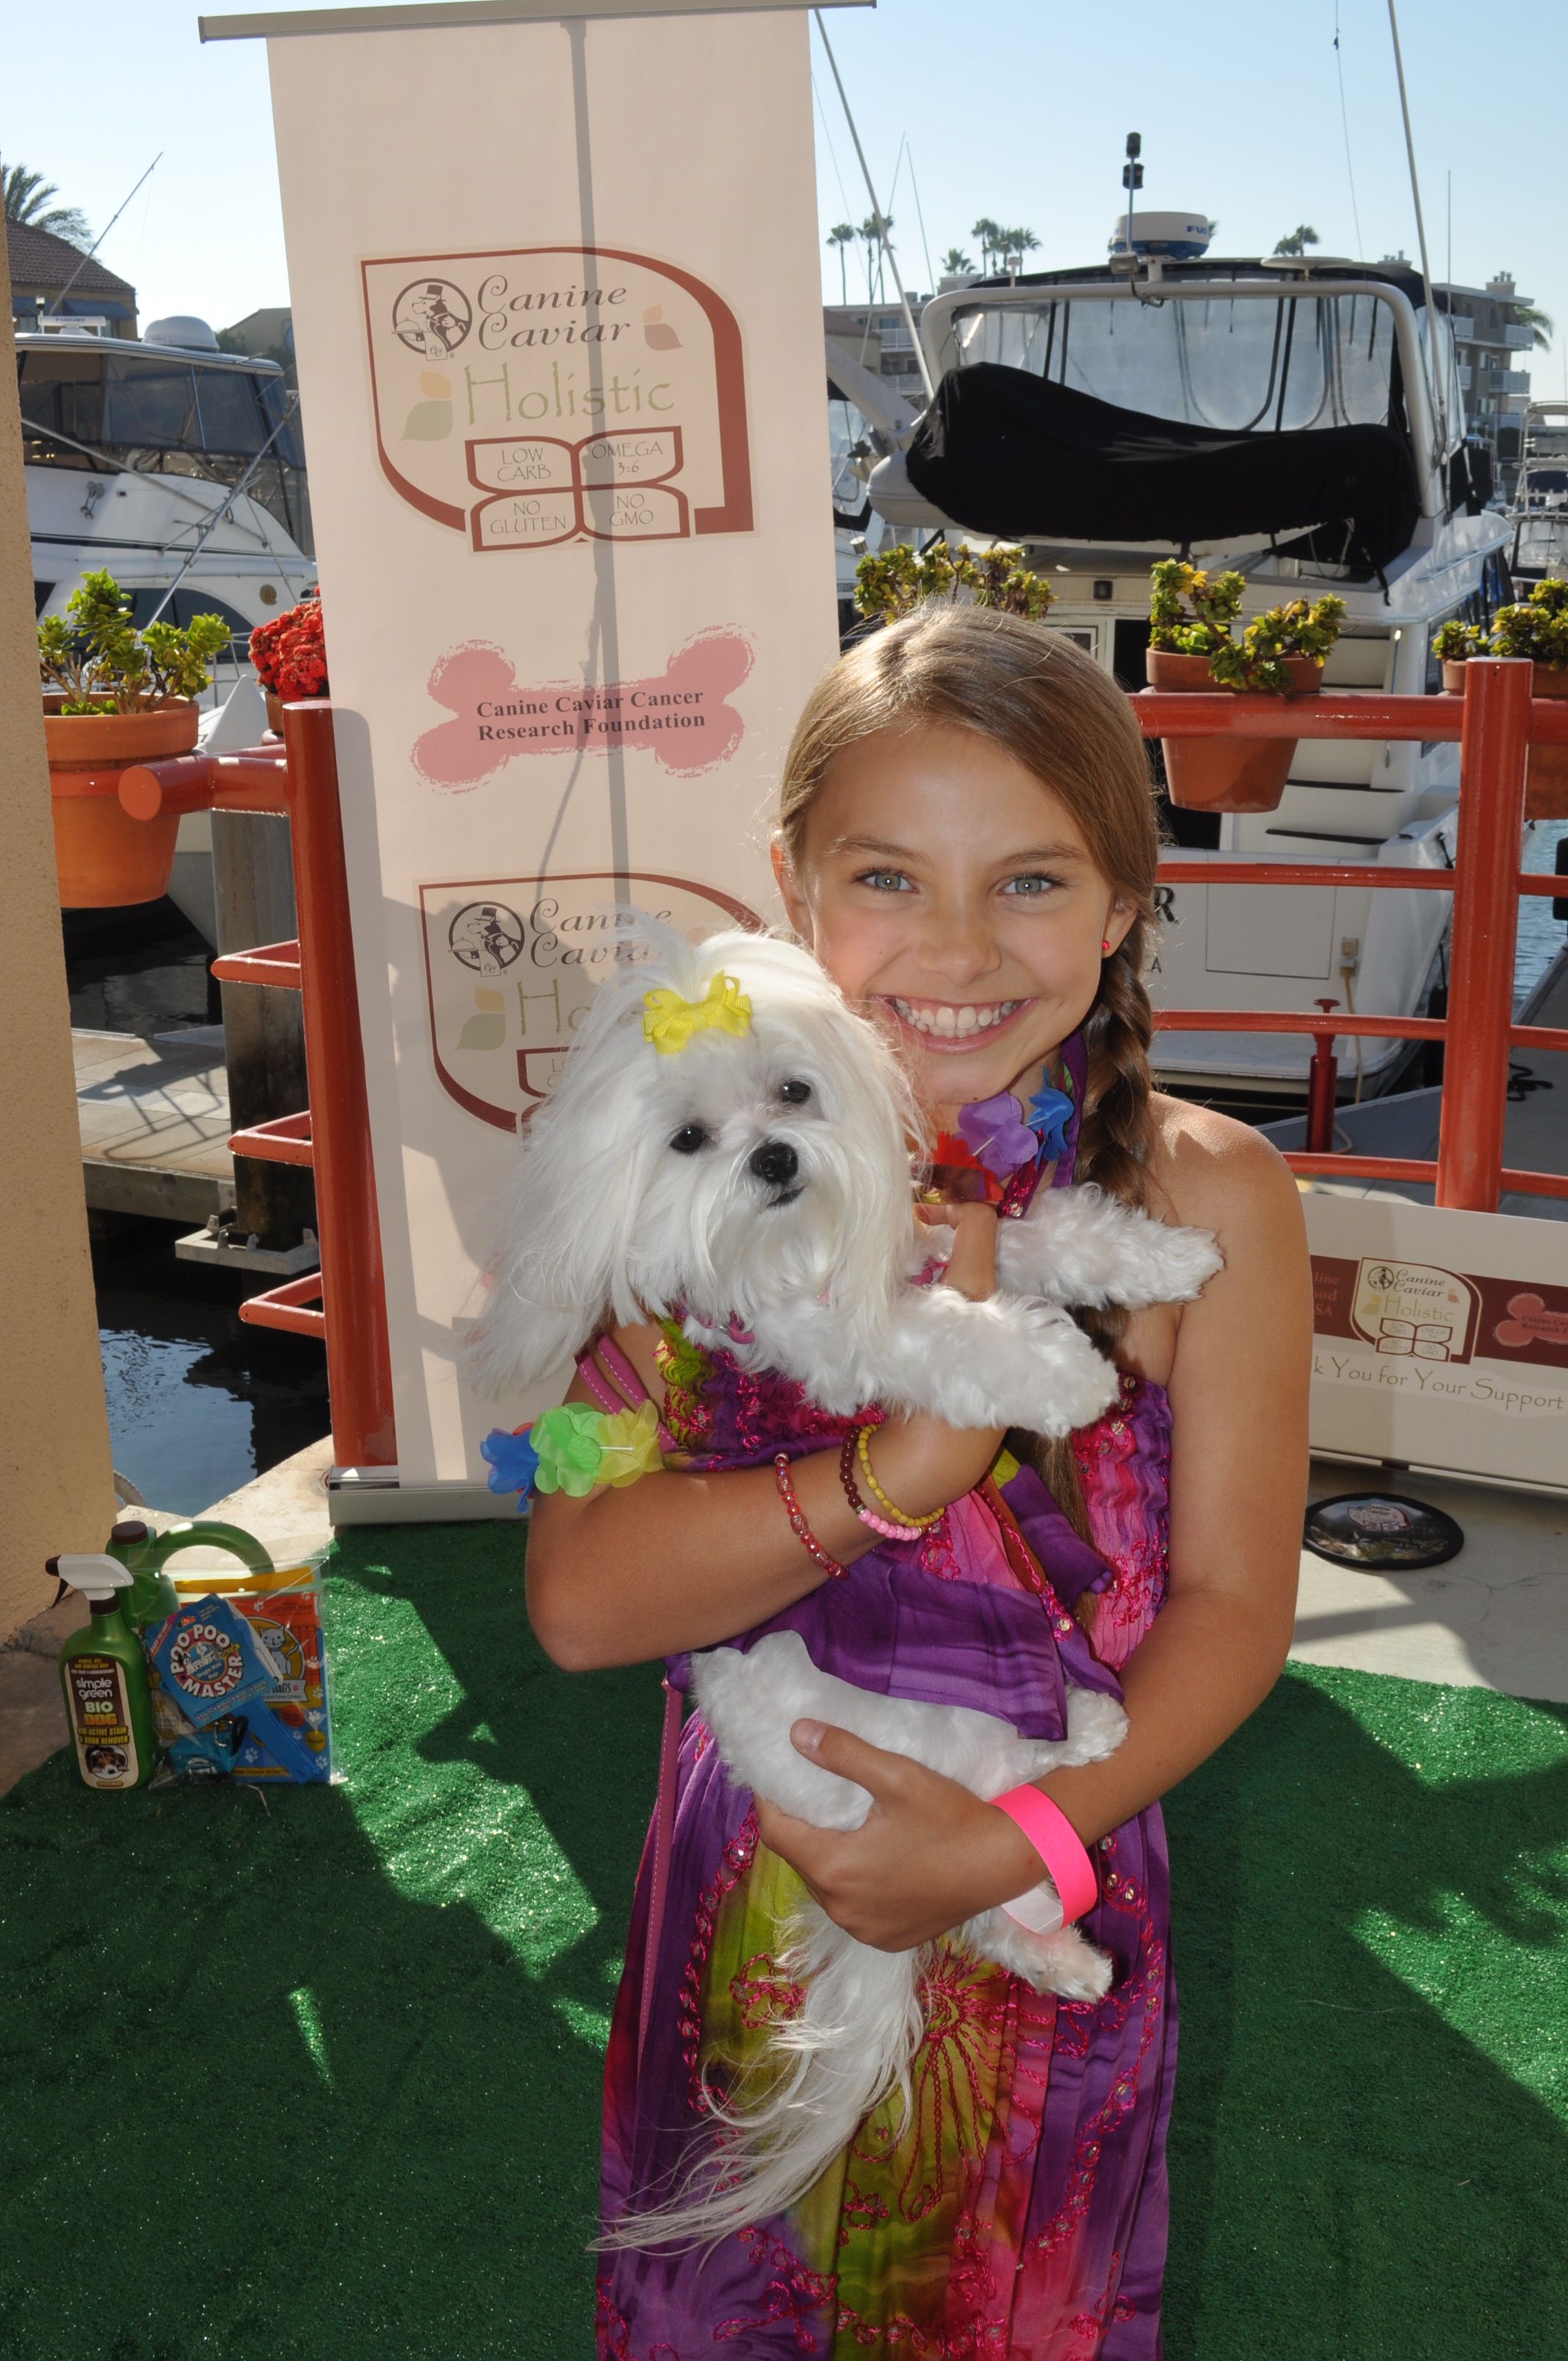 Caitlin Carmichael and Tallulah attend a charity fundraiser benefiting the Canine Caviar Cancer Research Foundation 2013